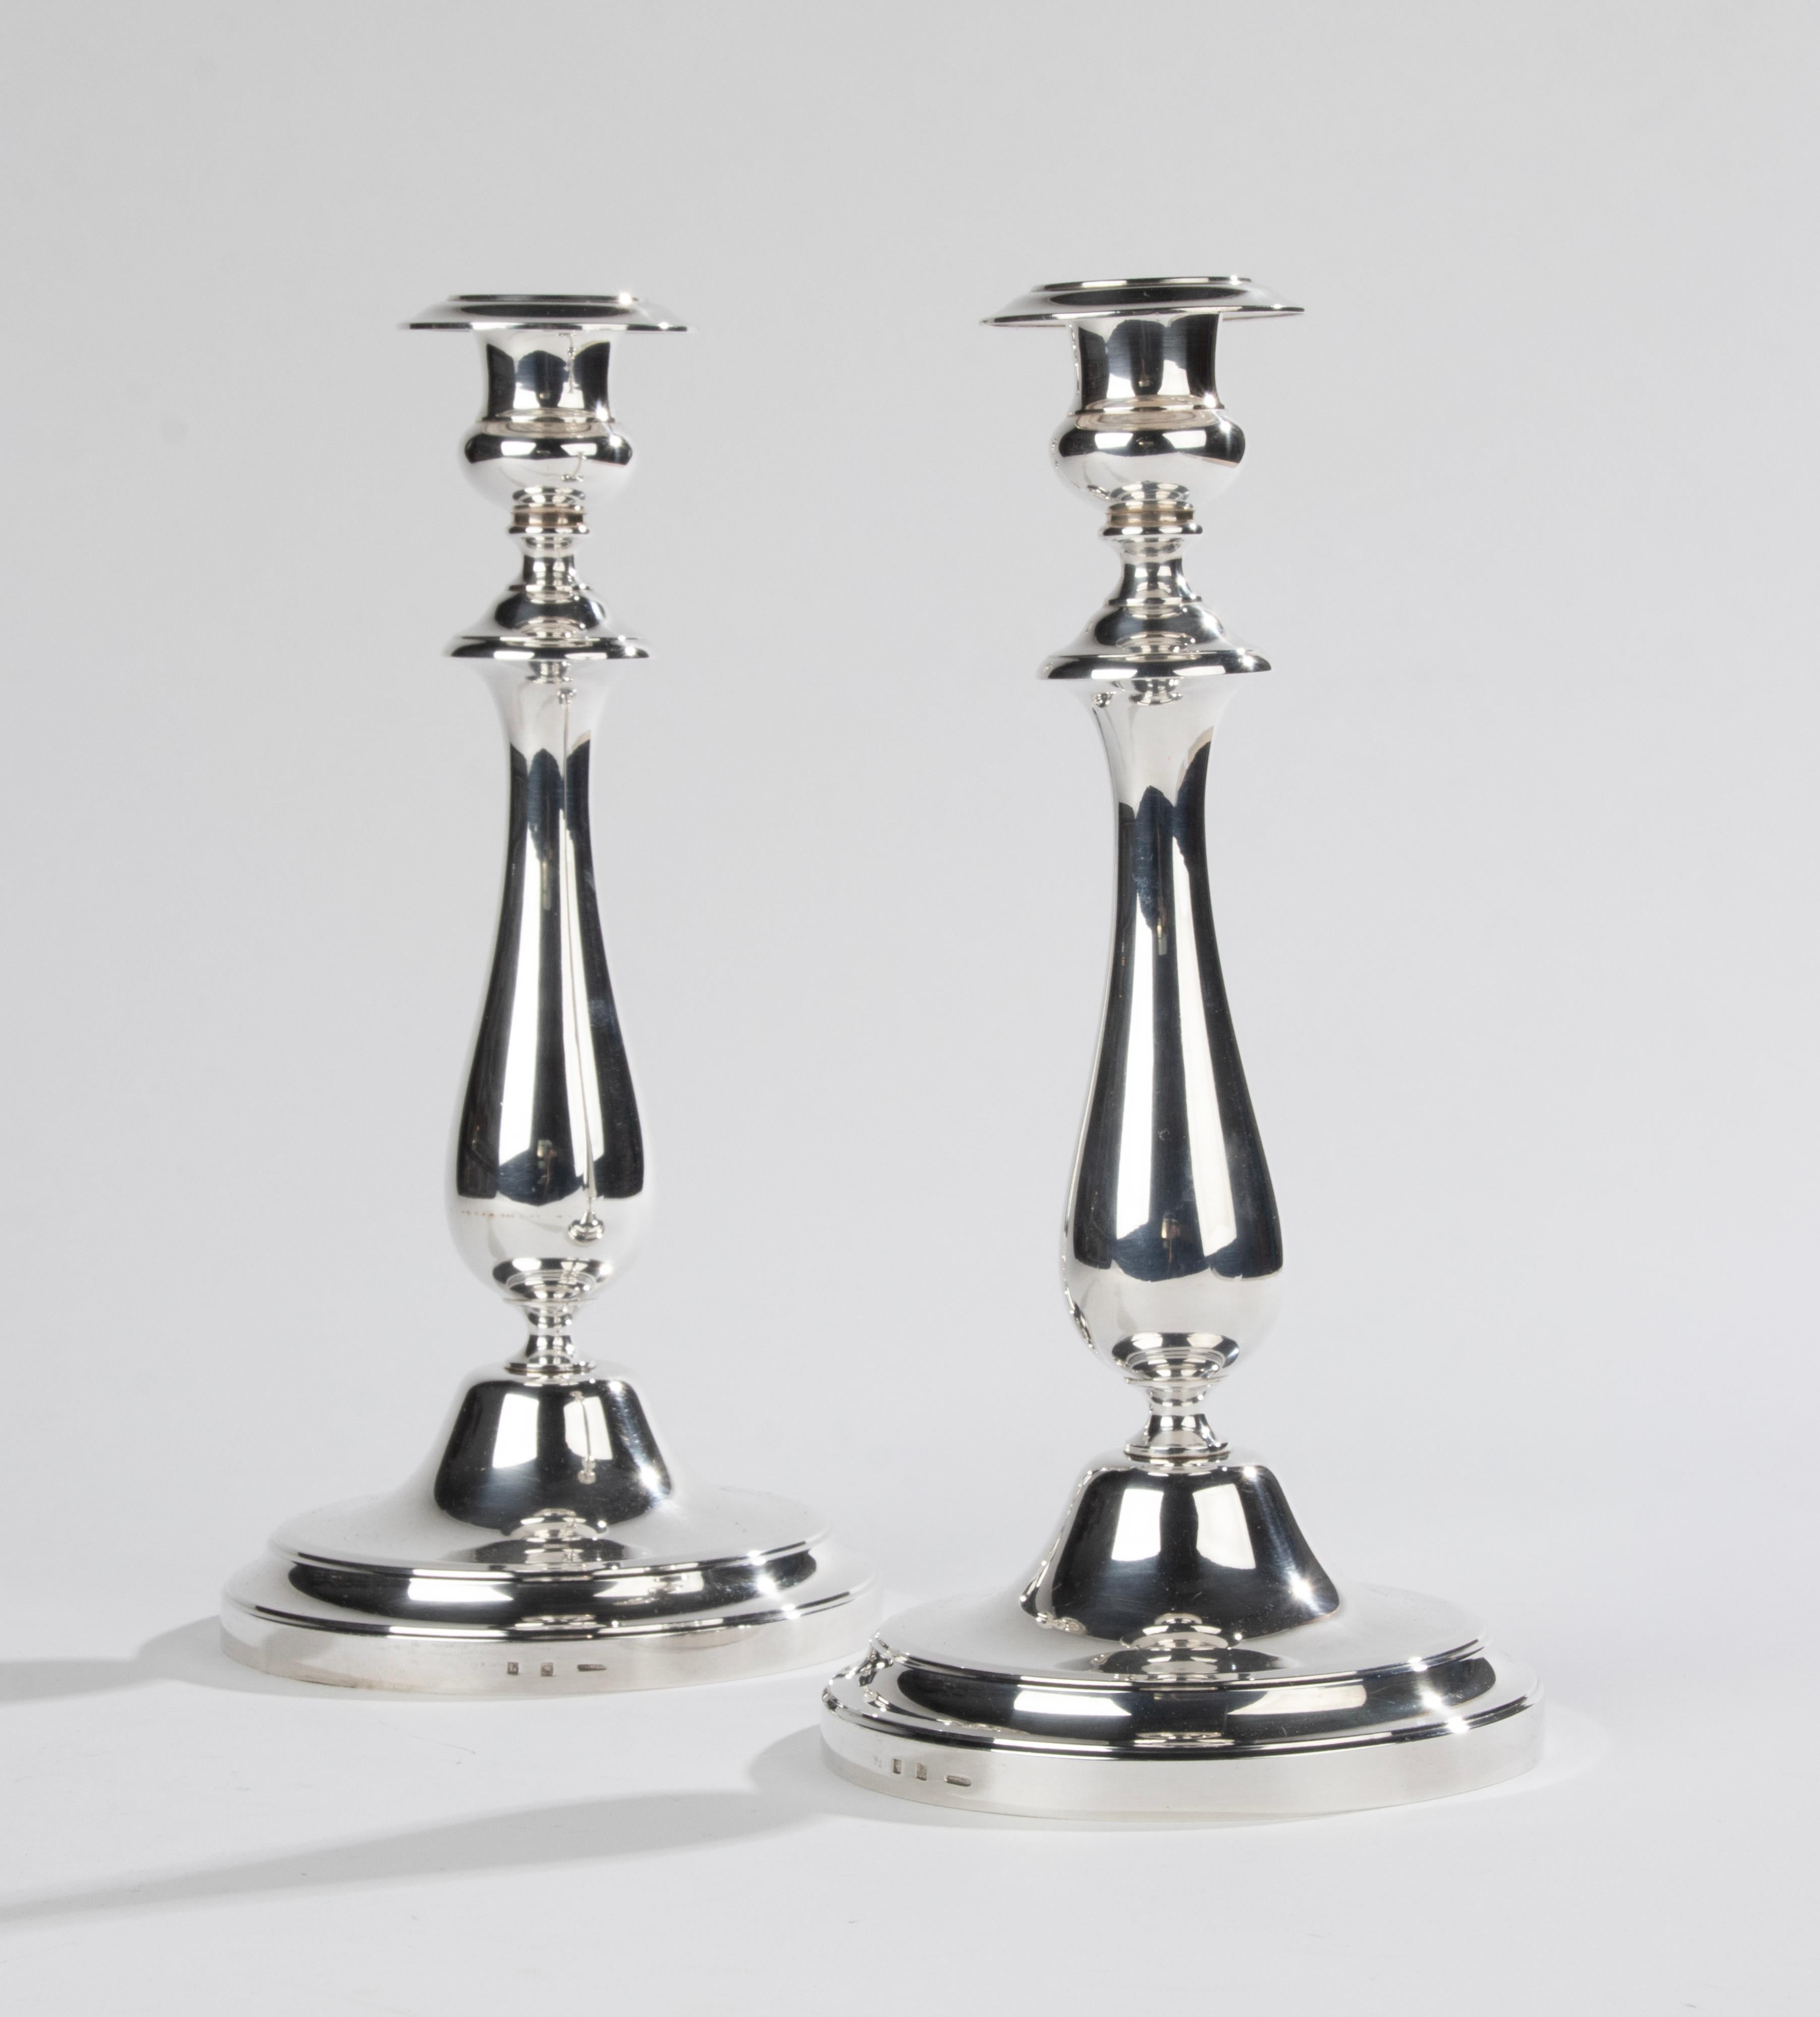 A Pair of Modern Classic Silver Plated Candlesticks made by Christofle France 9